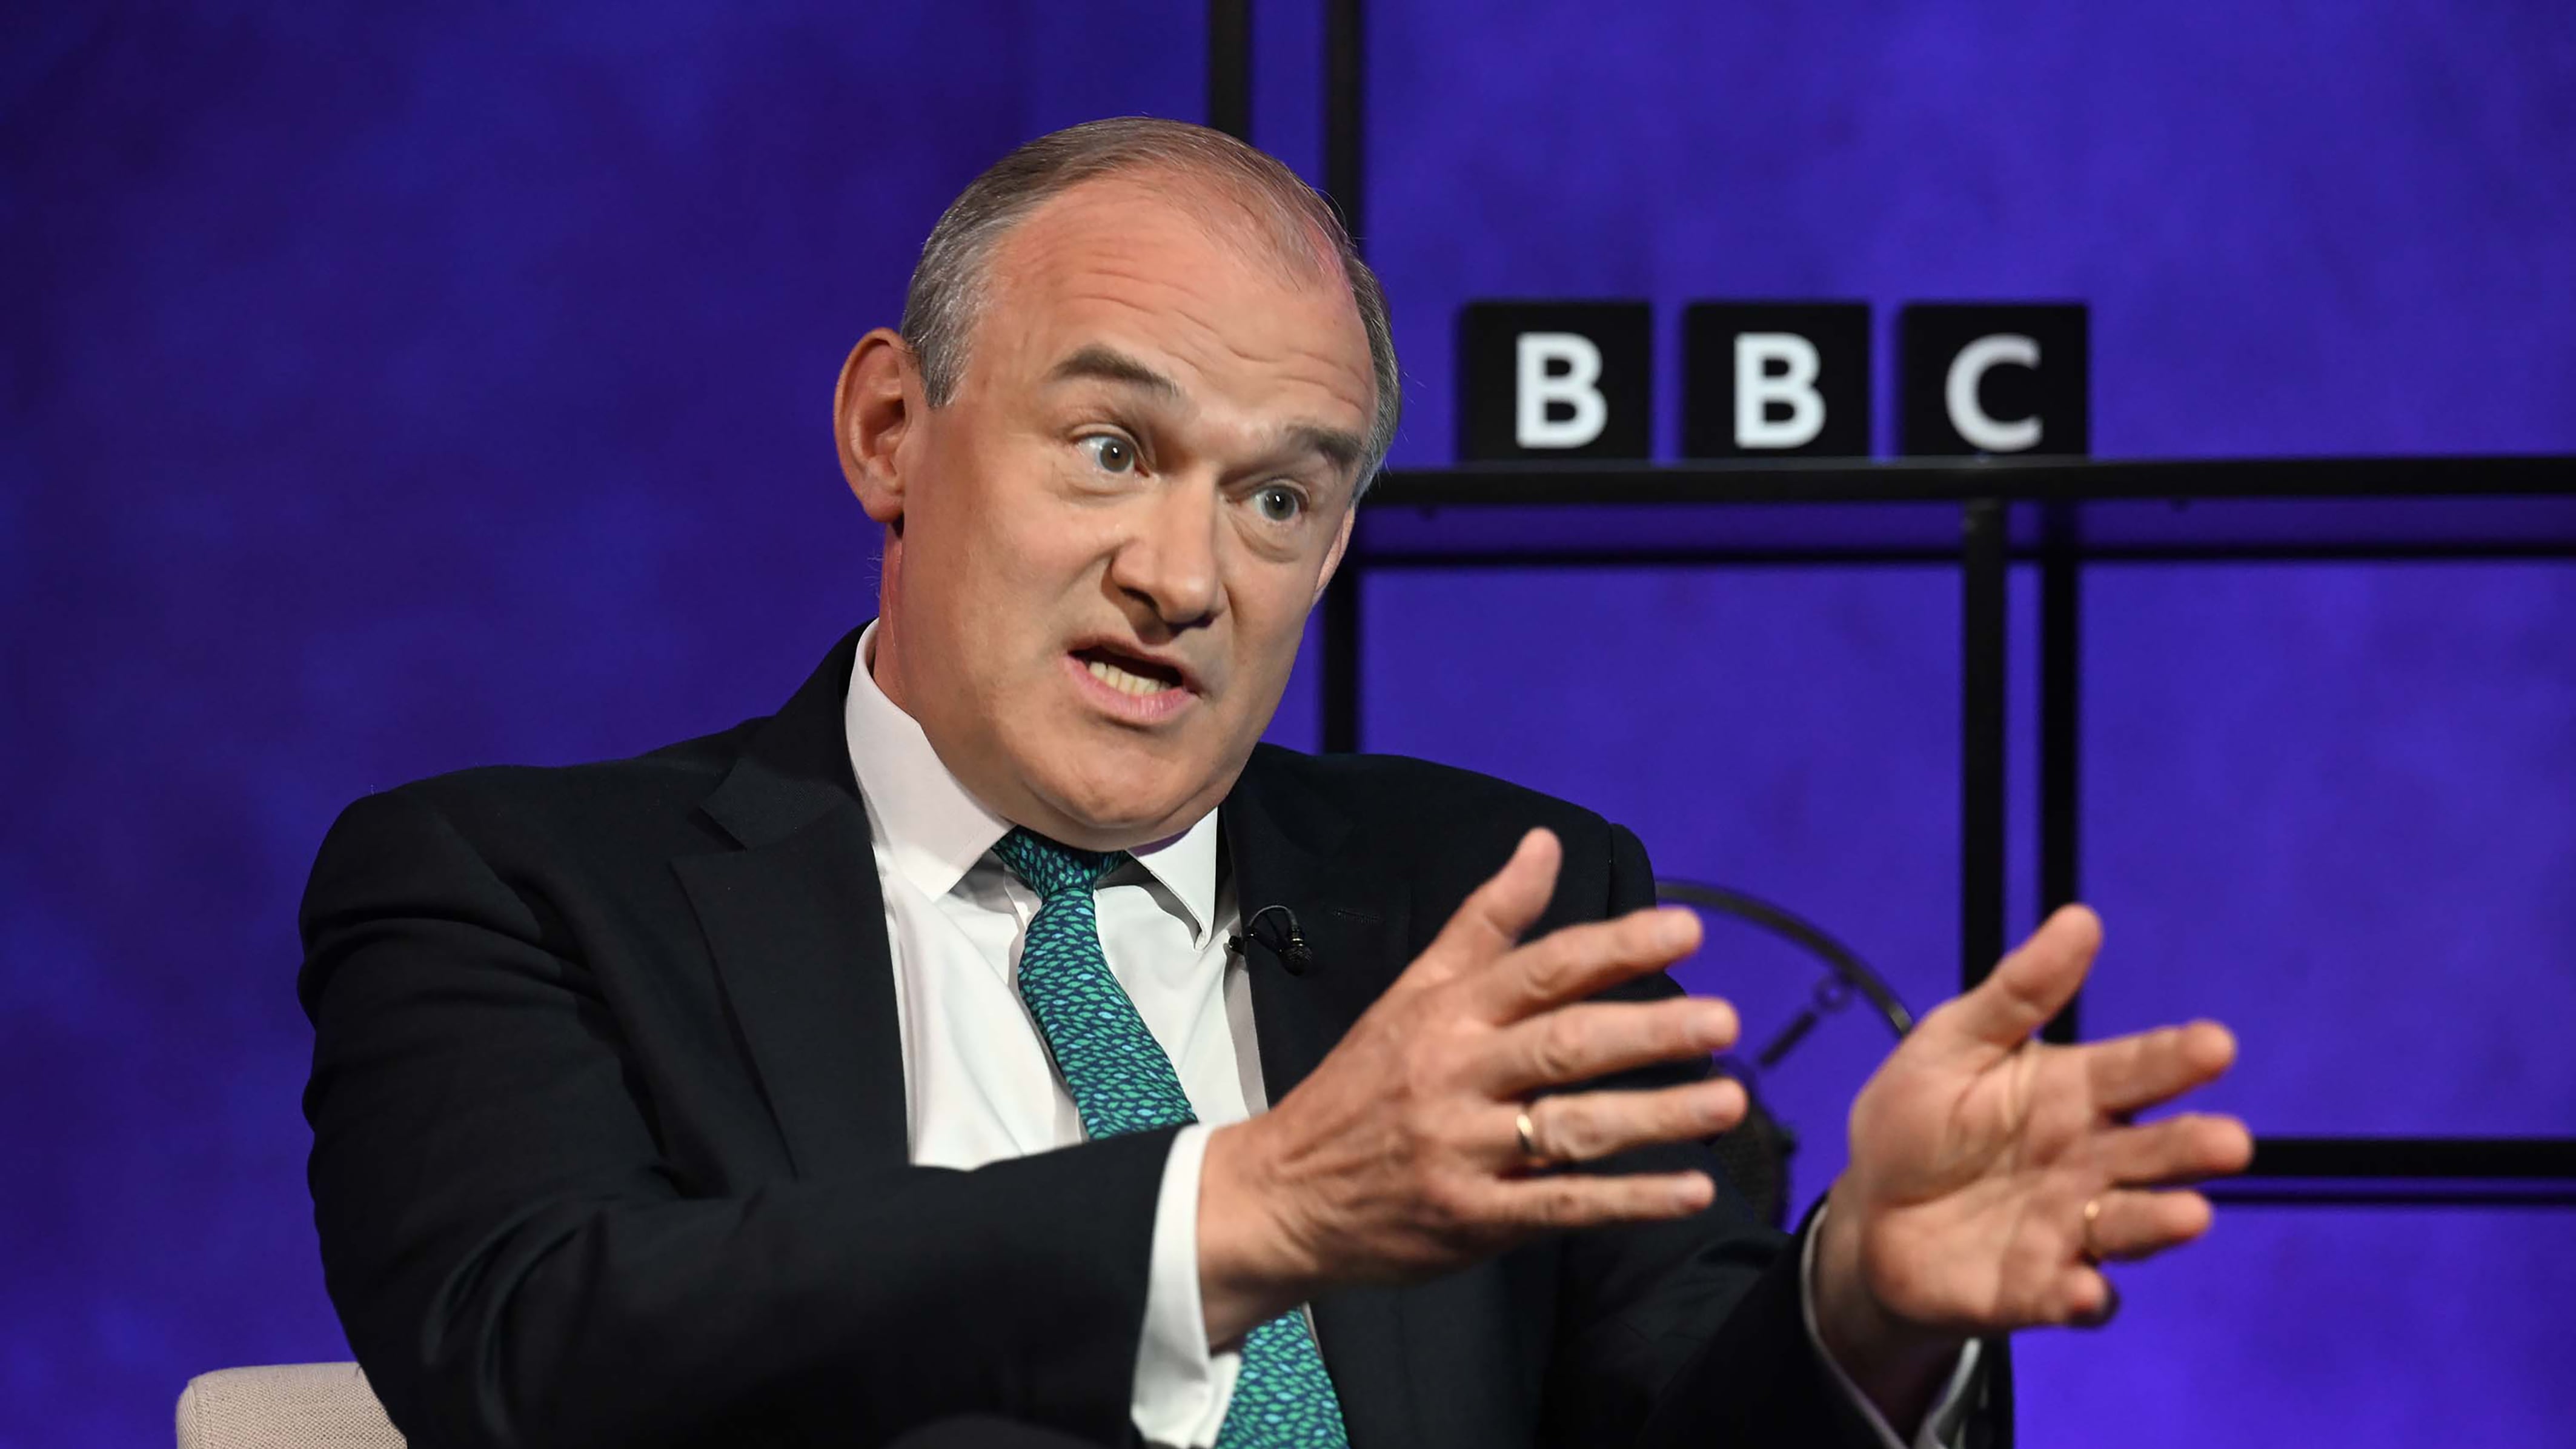 Sir Ed Davey said he does not ‘share any values’ with Nigel Farage